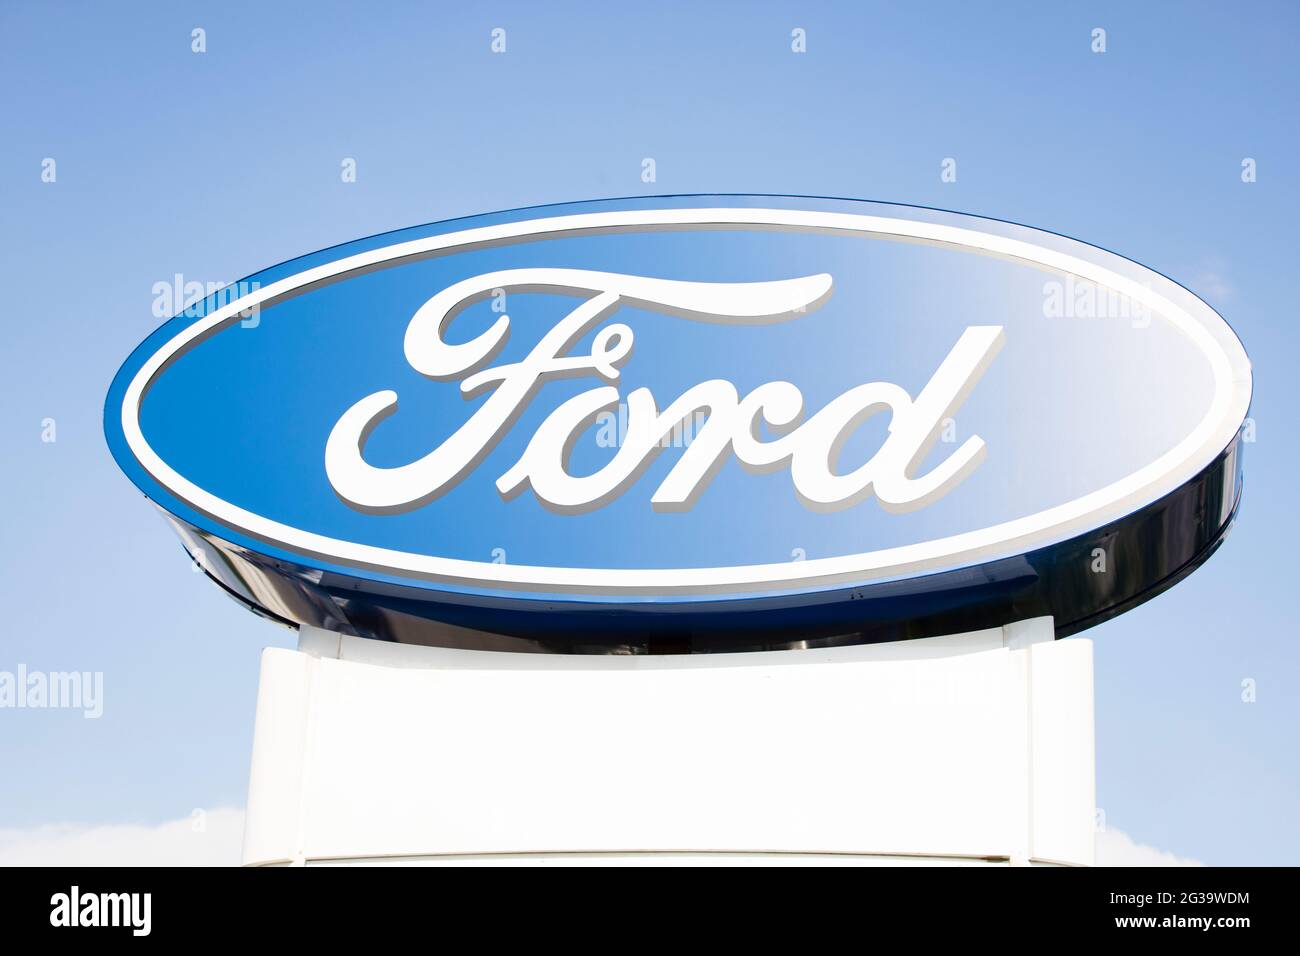 The Ford logo is on a billboard against a blue sky background. Stock Photo